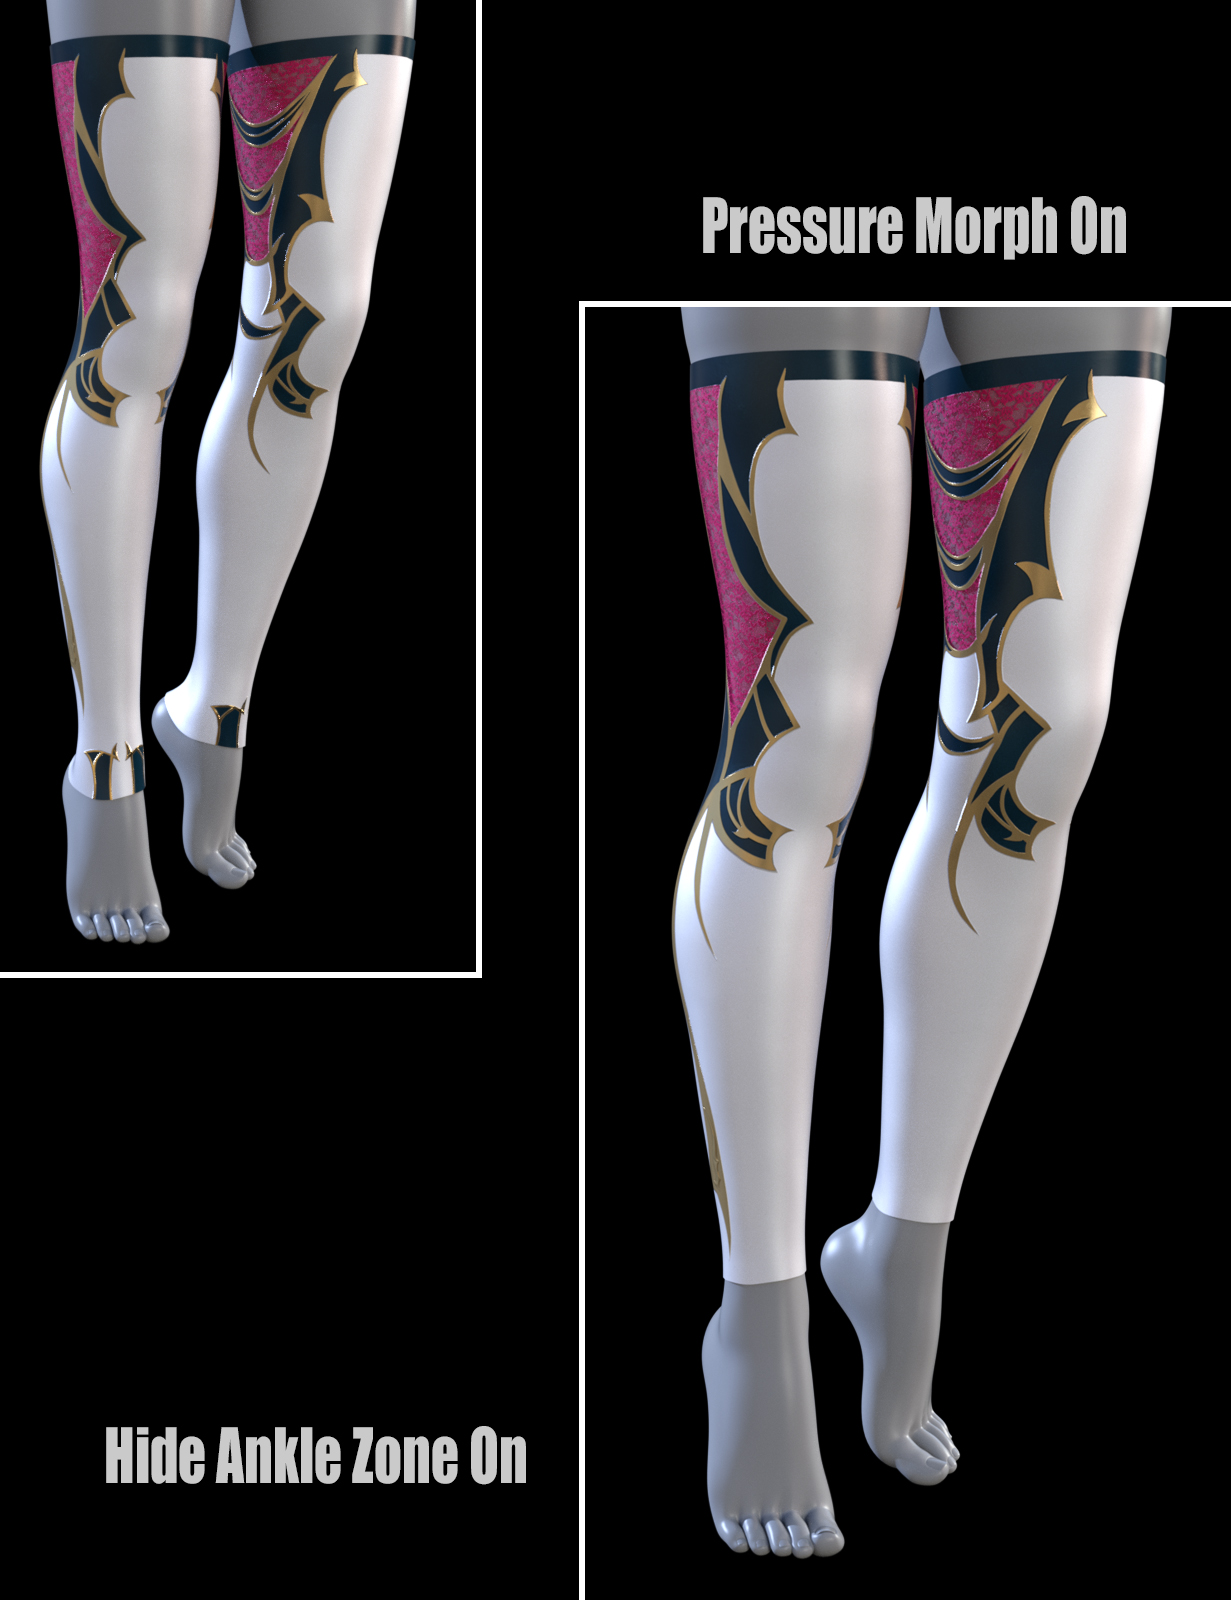 ZK Elpis Mage Armor Boots and Stockings for Genesis 8 and 8.1 Females by: ZKuro, 3D Models by Daz 3D